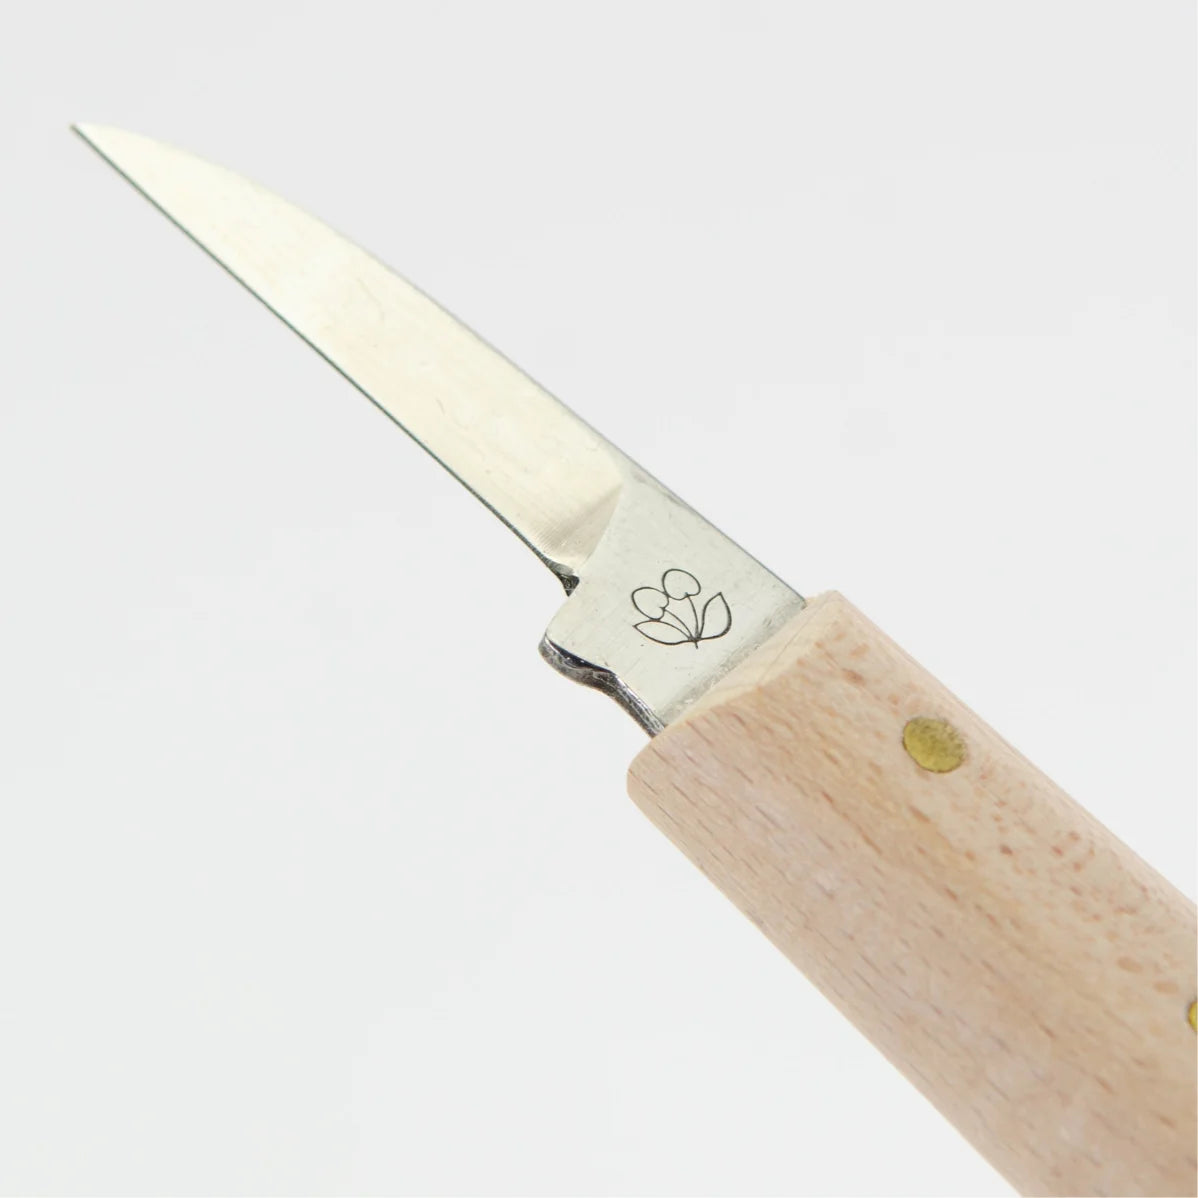 Carving Knife - Woodworking tool